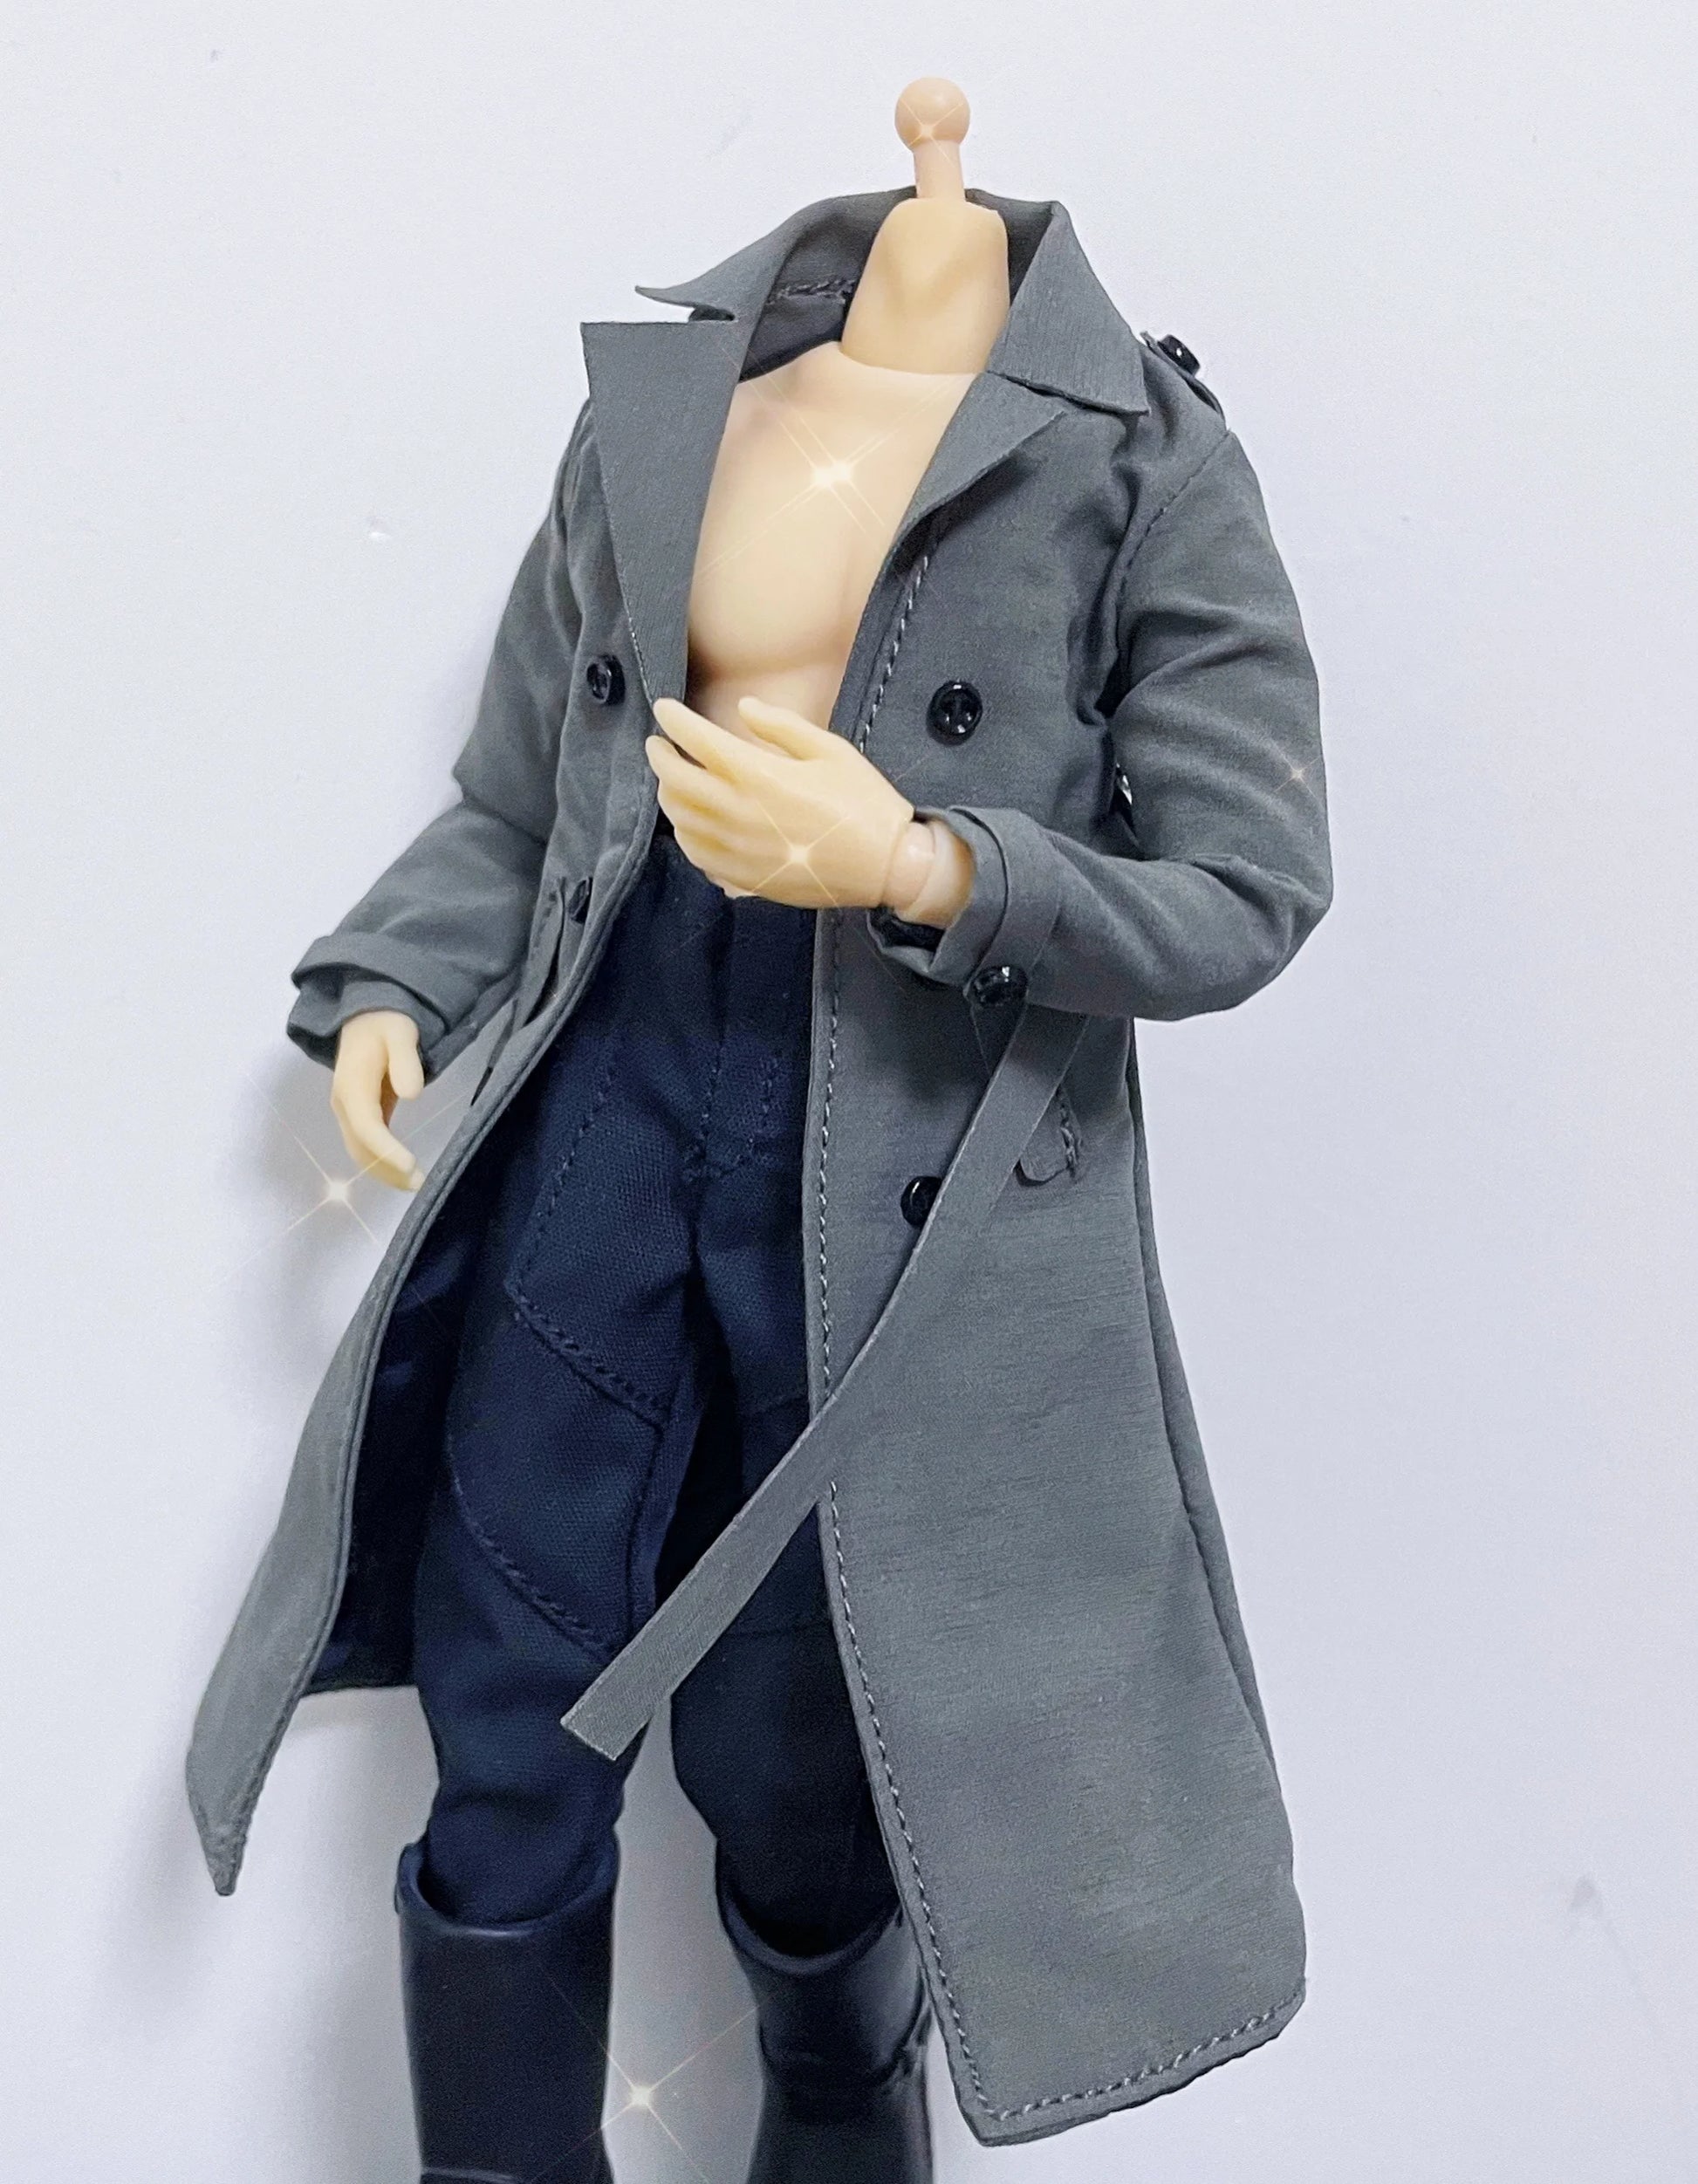 6-Inch Action Figure Windbreaker Coat Clothing Accessory 1/12 Scale